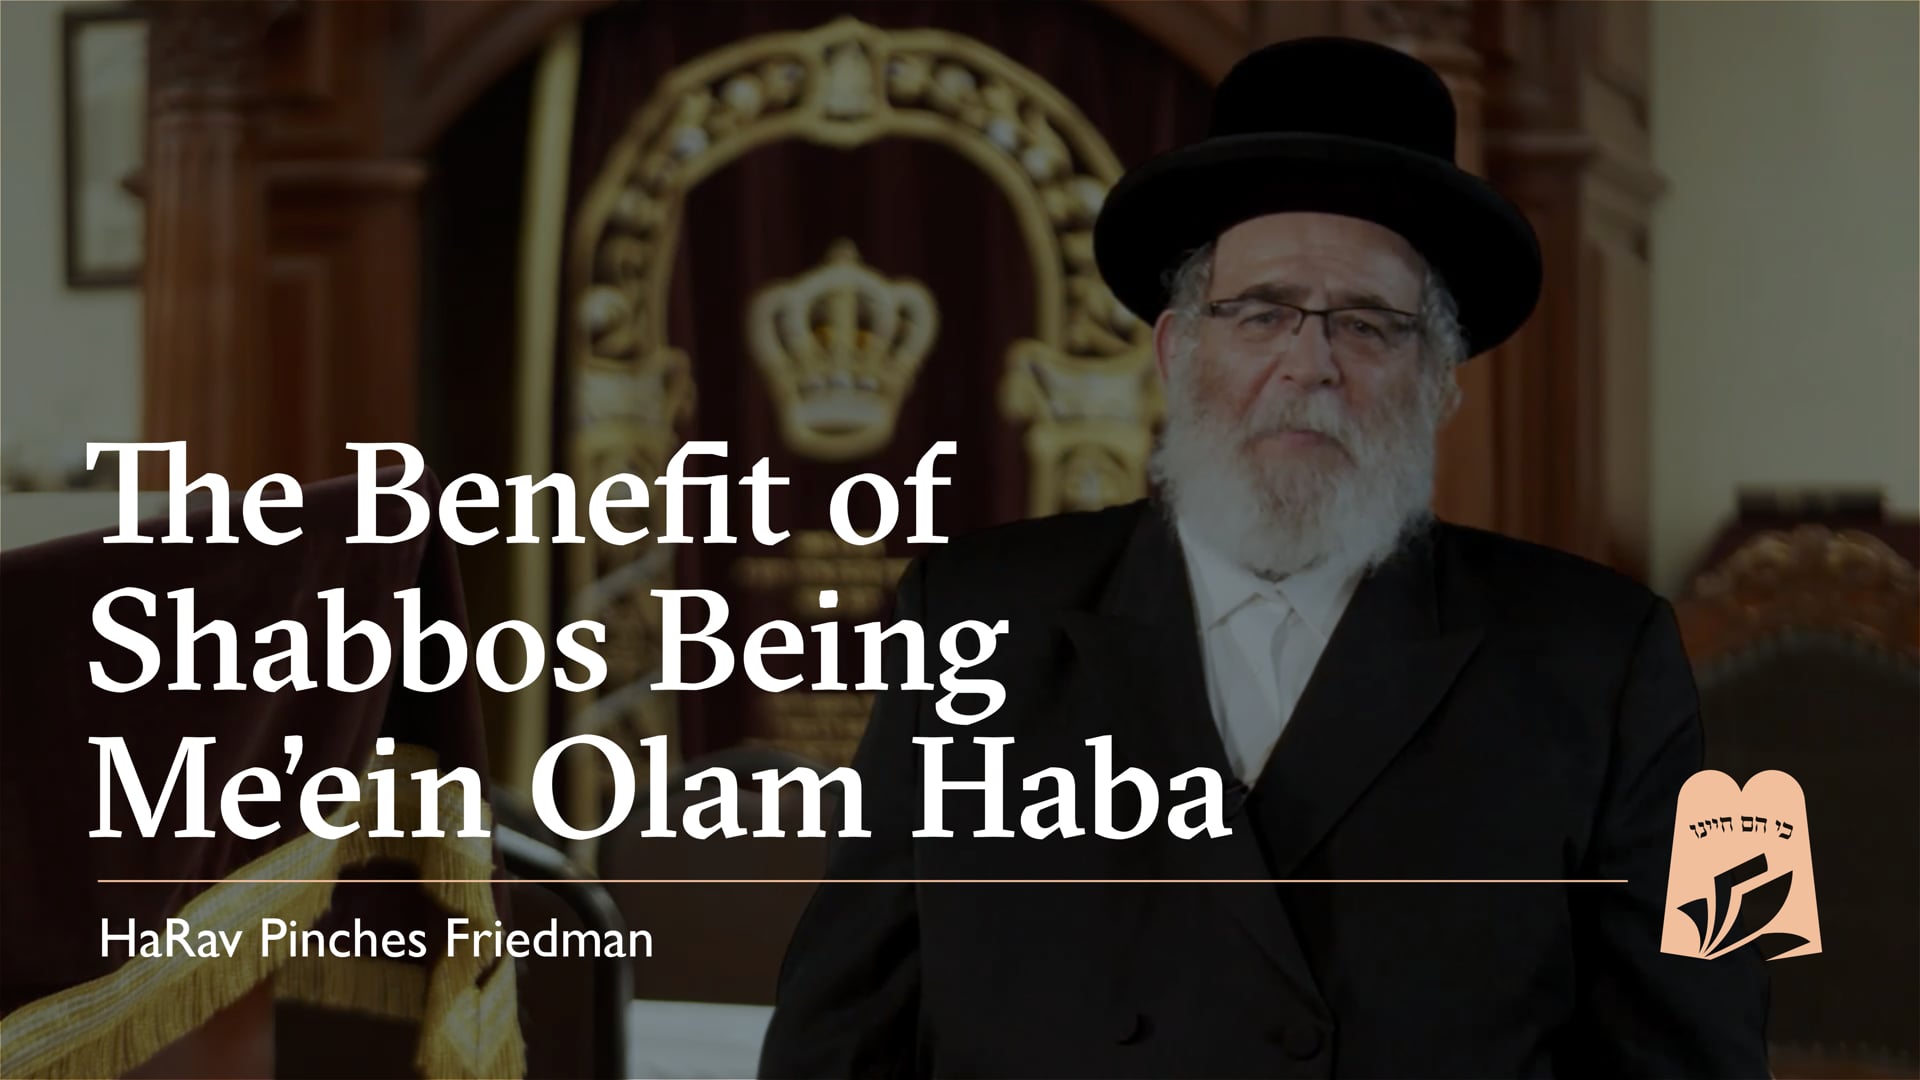 Rav Pinches Friedman E2 - The Benefit of Shabbos Being Me'ein Olam Haba